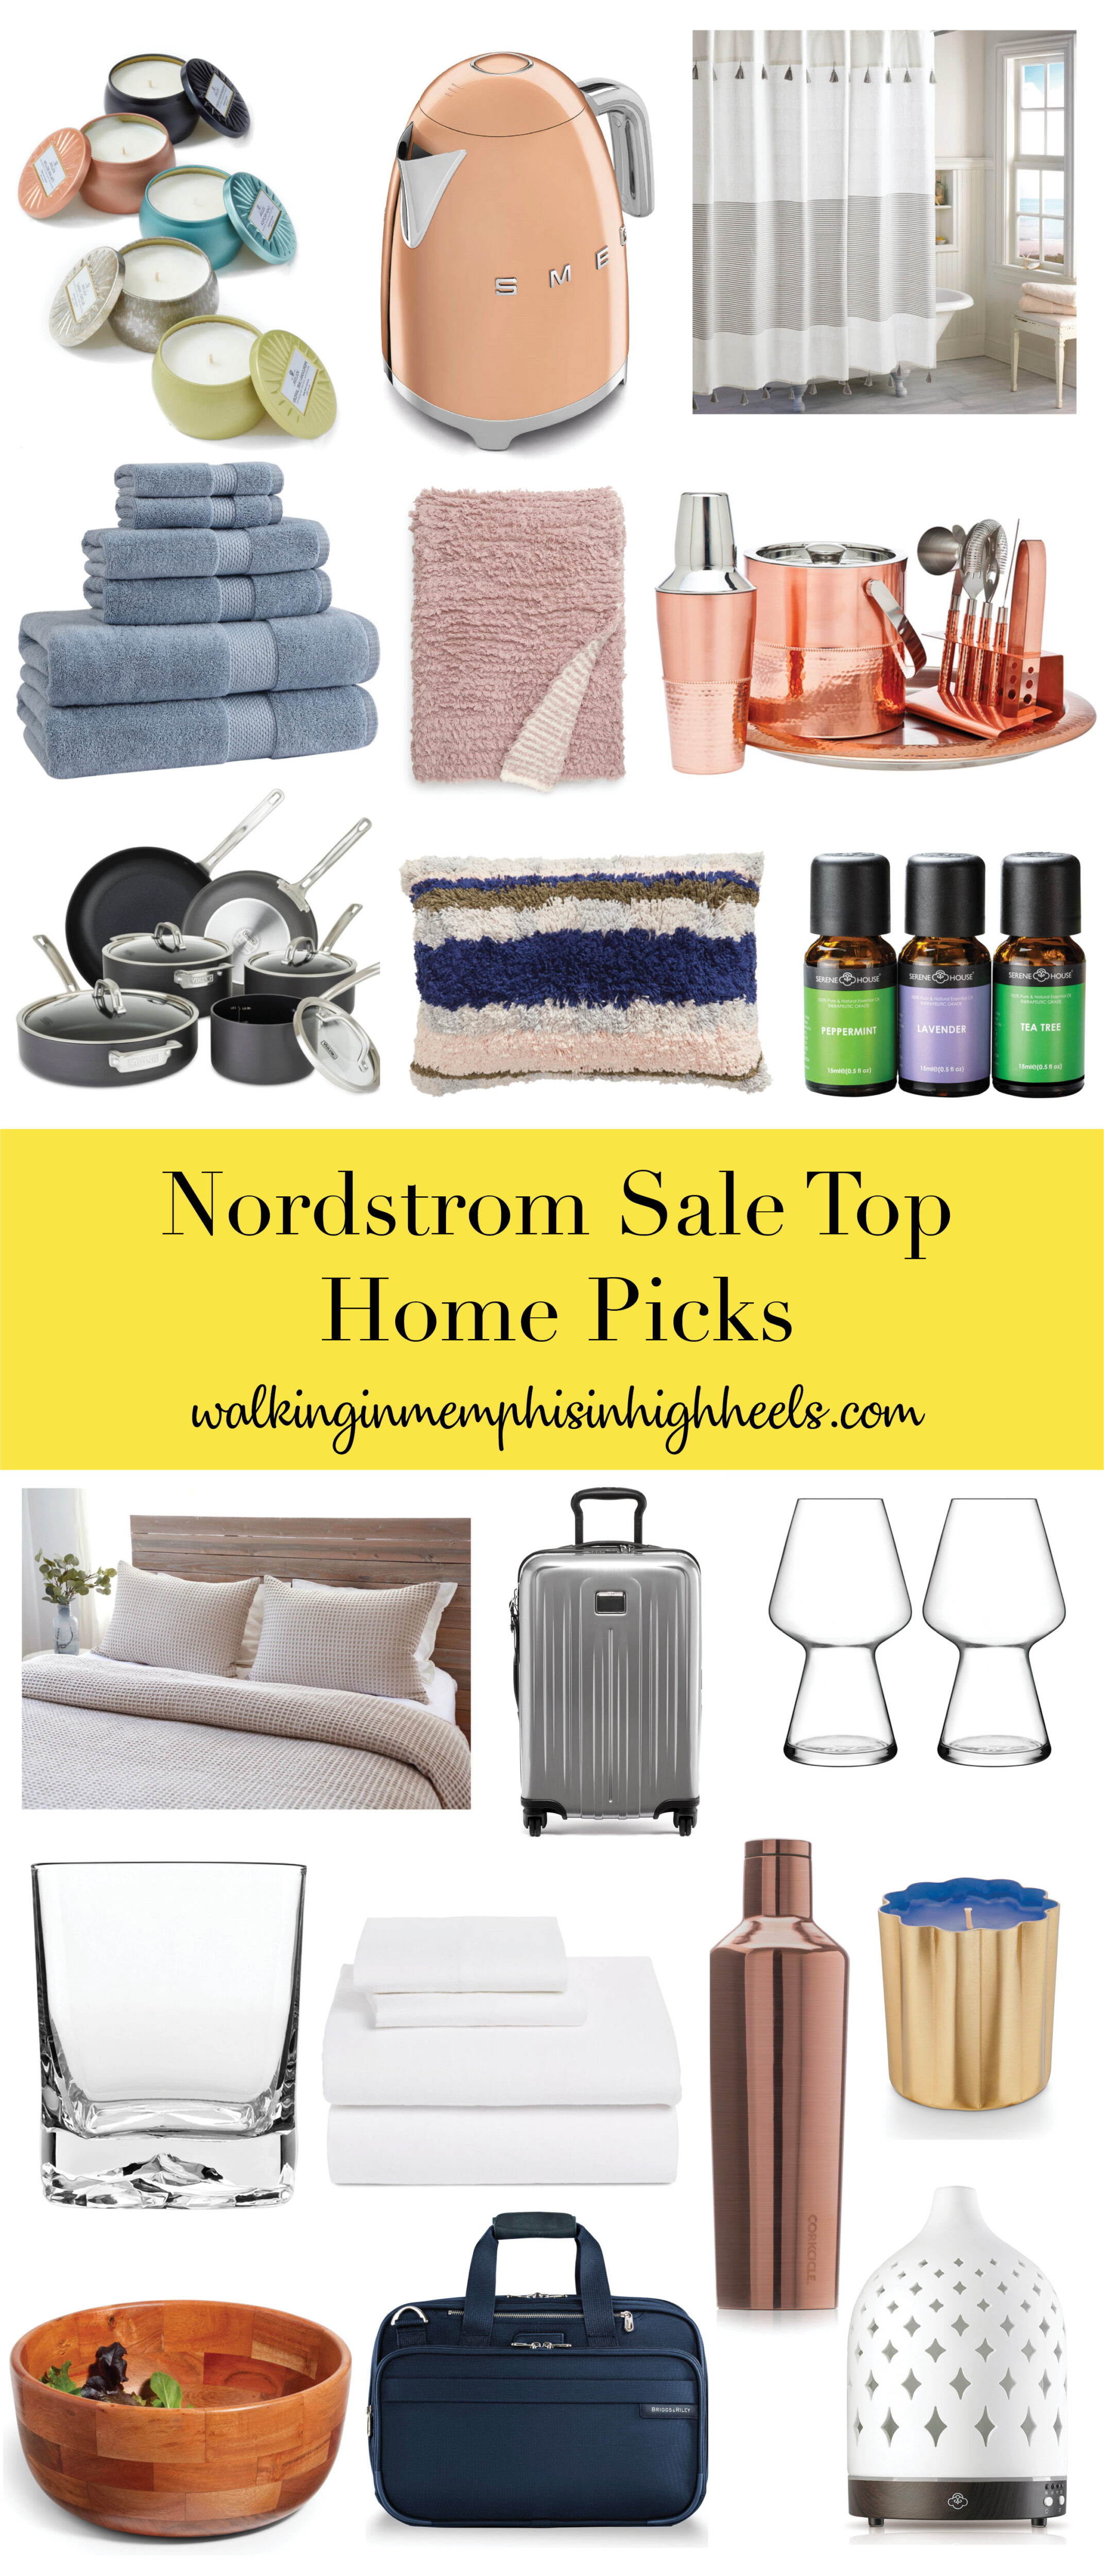 Nordstrom Anniversary Sale: Top Home Picks featured by top Memphis lifestyle blogger, Walking in Memphis in High Heels.